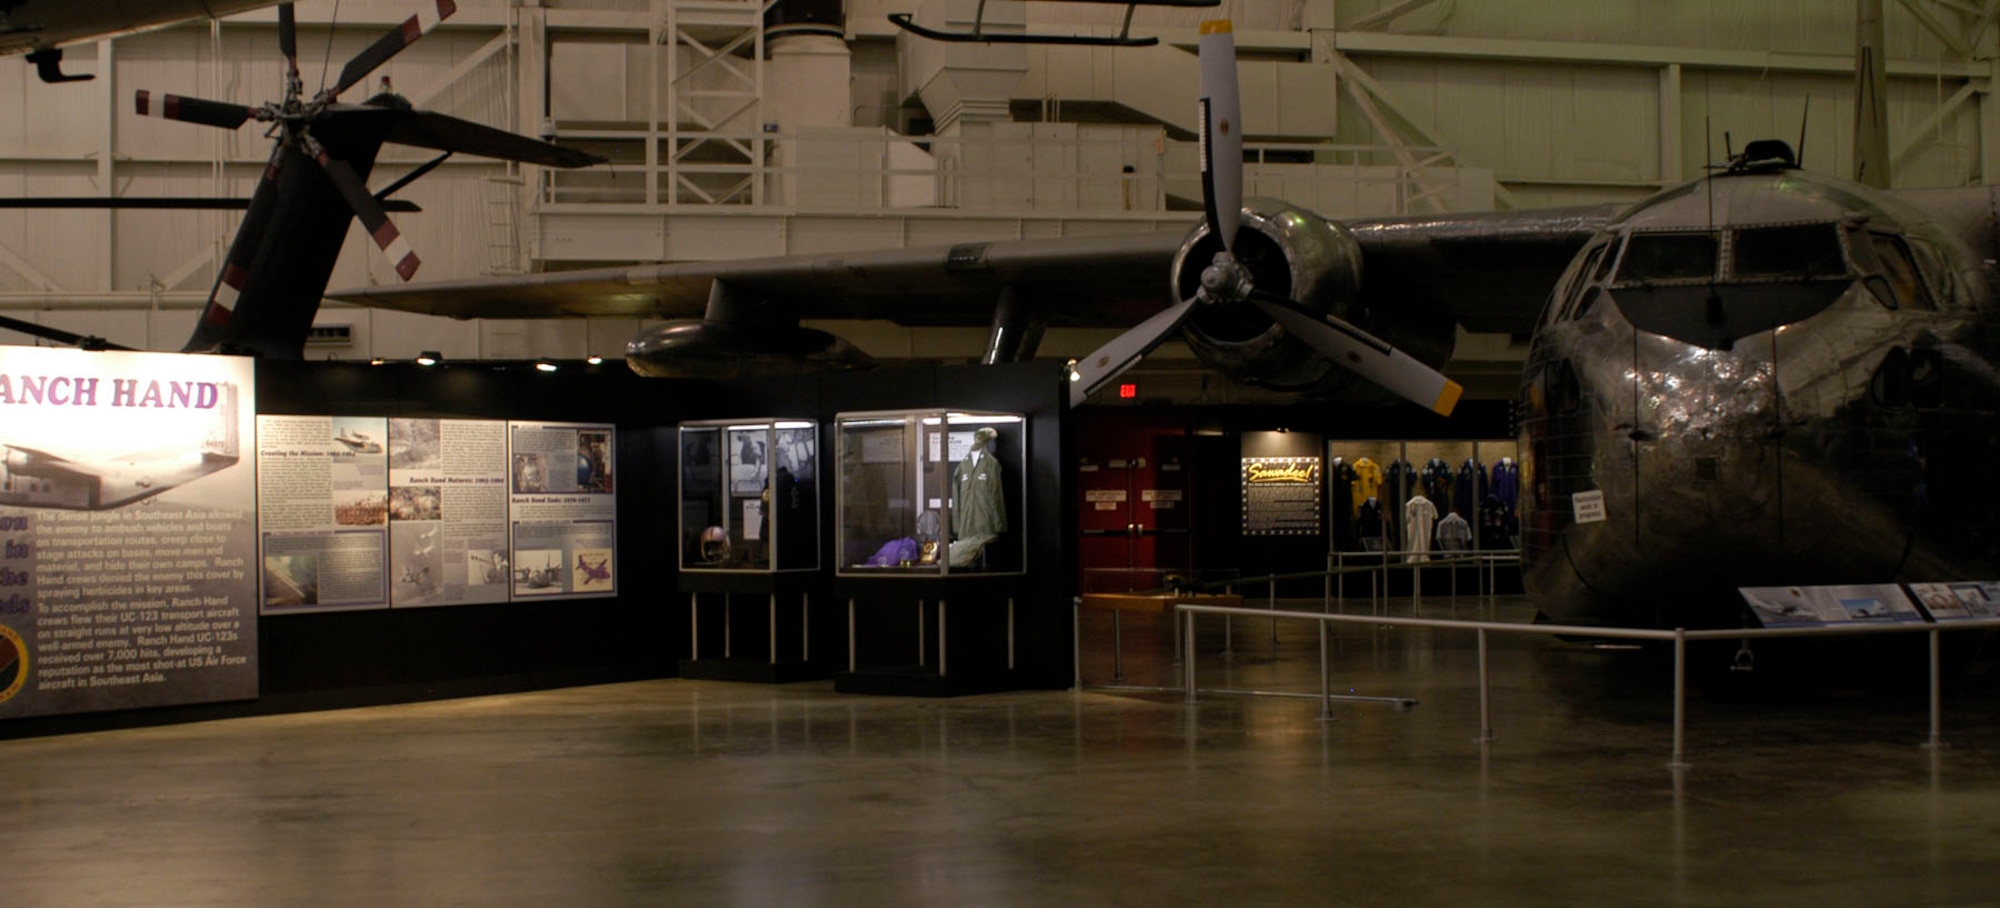 DAYTON, Ohio - C-123K Patches and Ranch Hand exhibit in the Southeast Asia War Gallery at the National Museum of the U.S. Air Force. (U.S. Air Force photo)  